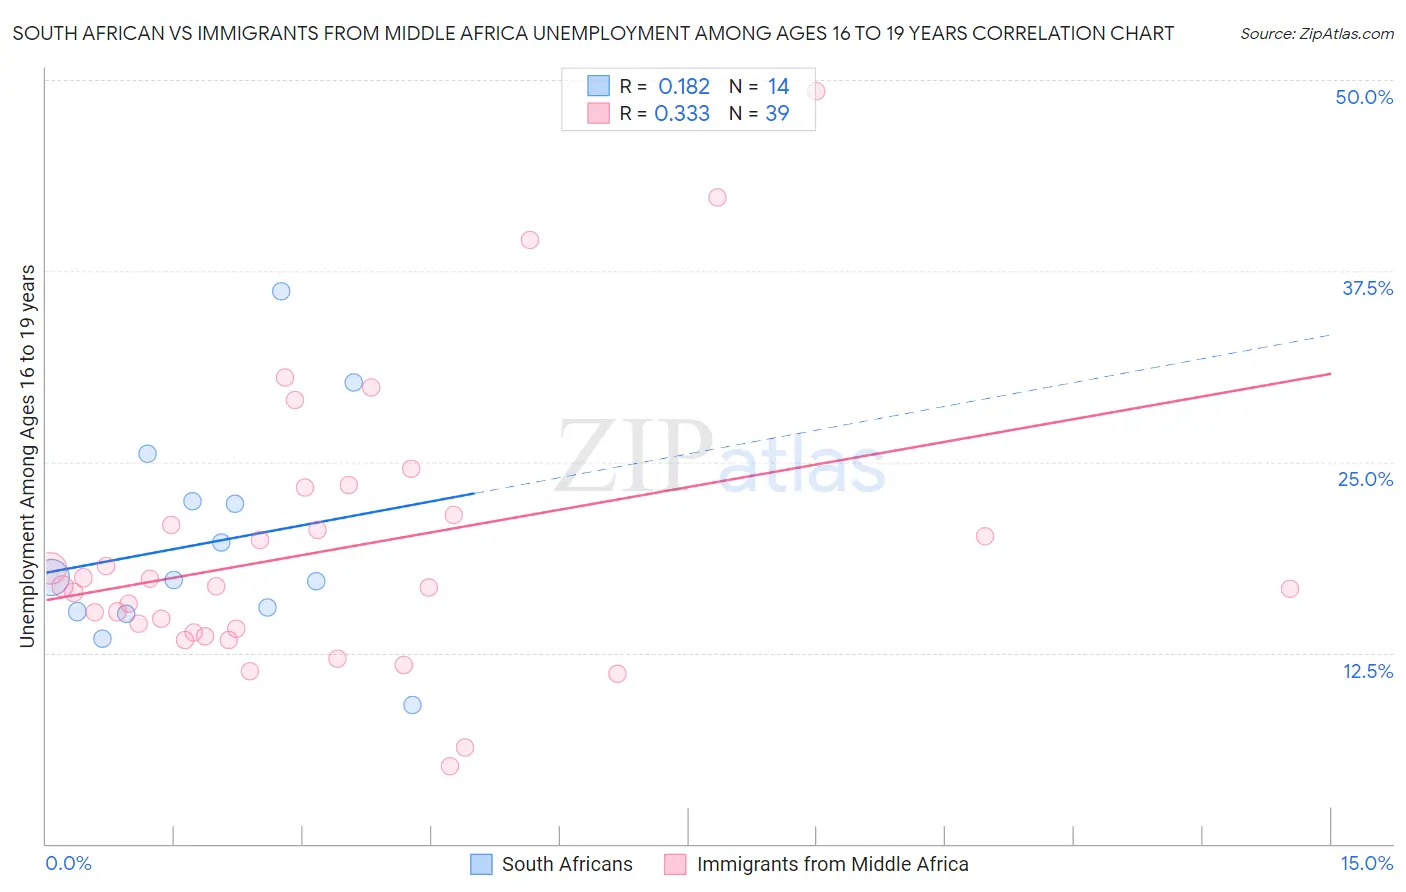 South African vs Immigrants from Middle Africa Unemployment Among Ages 16 to 19 years